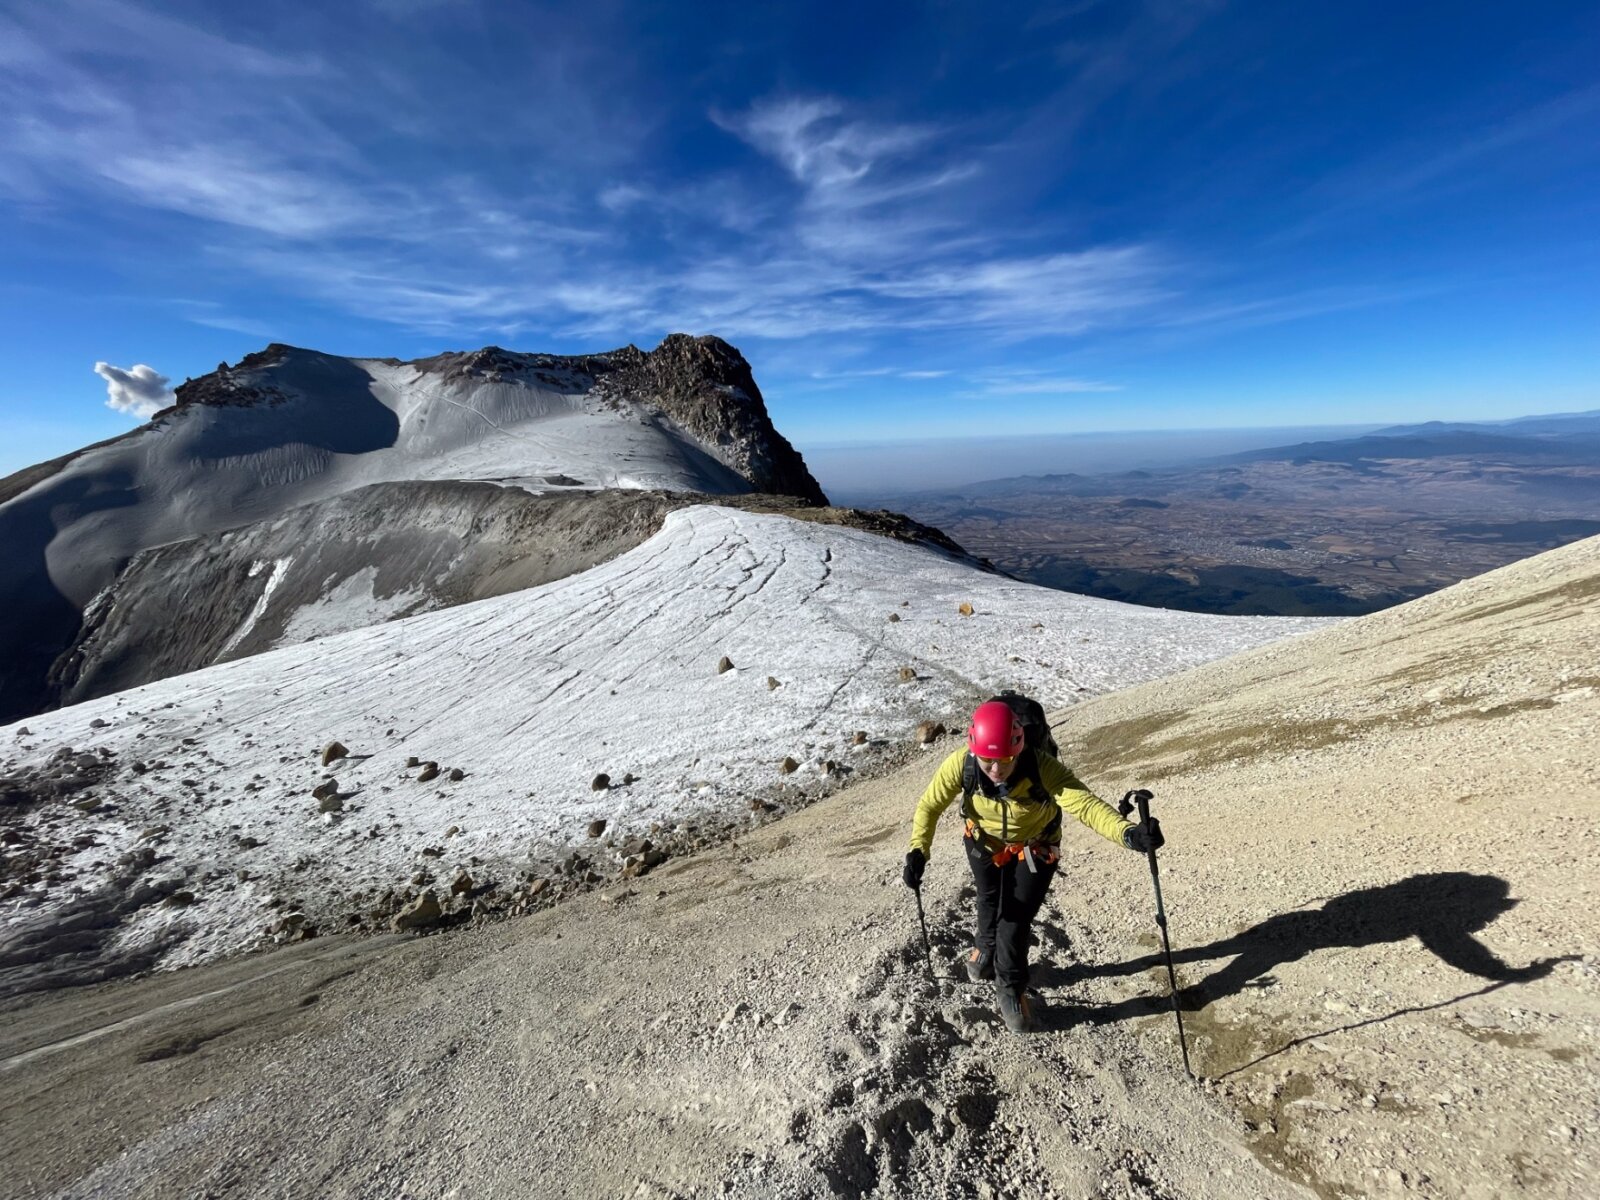 Clients on an acclimatization hike during a Volcanoes of Mexico Expedition